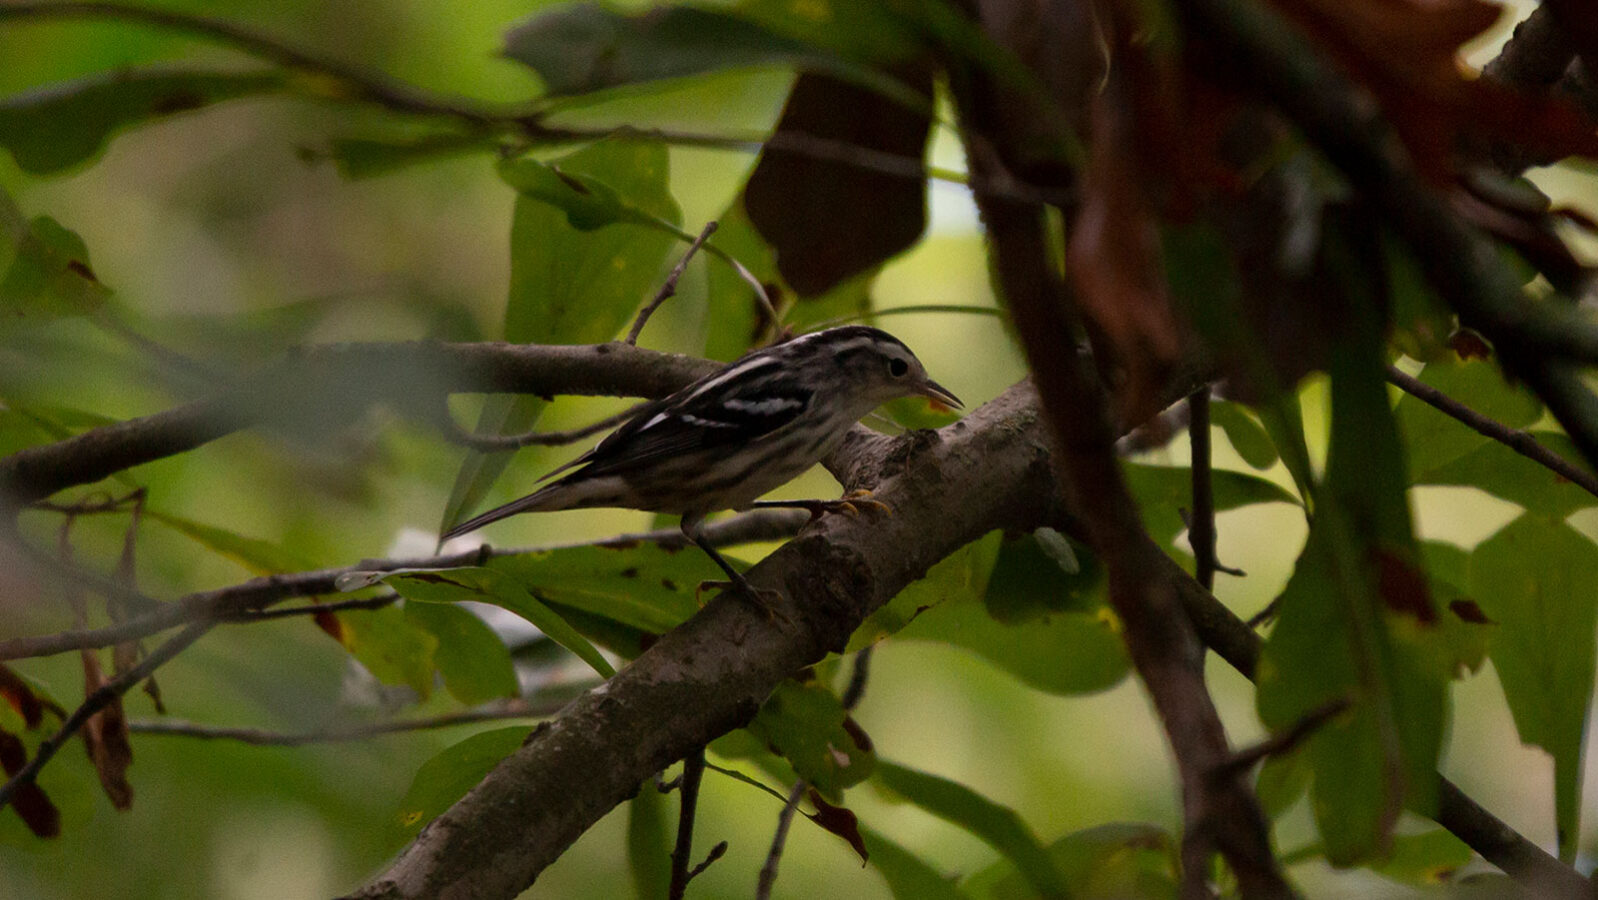 Black and white warbler foraging on a tree branch